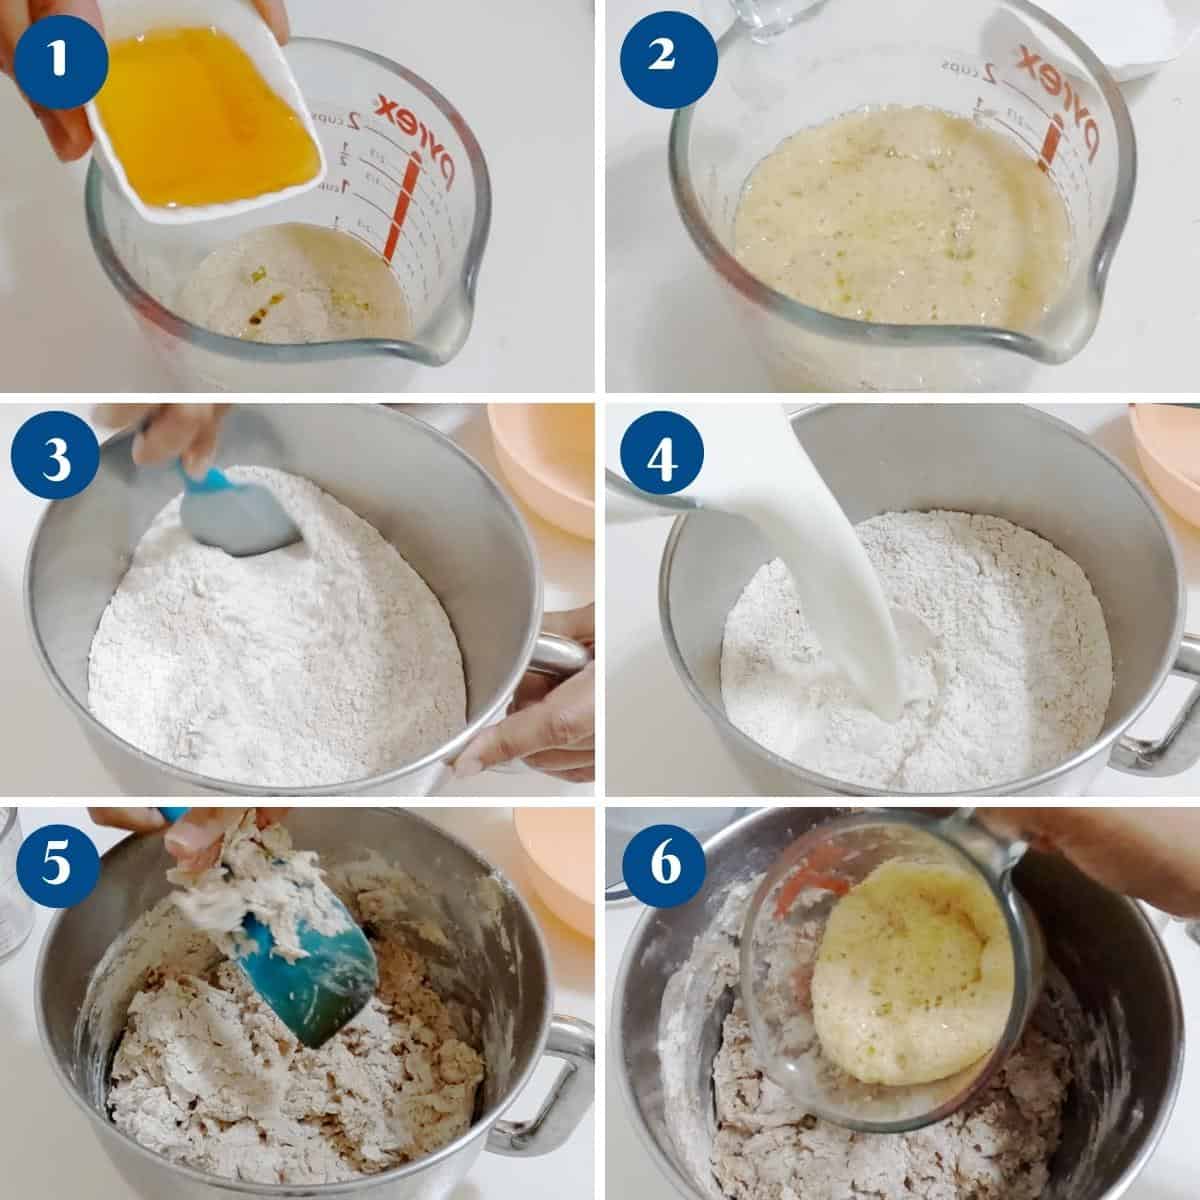 How to knead the whole wheat dough.